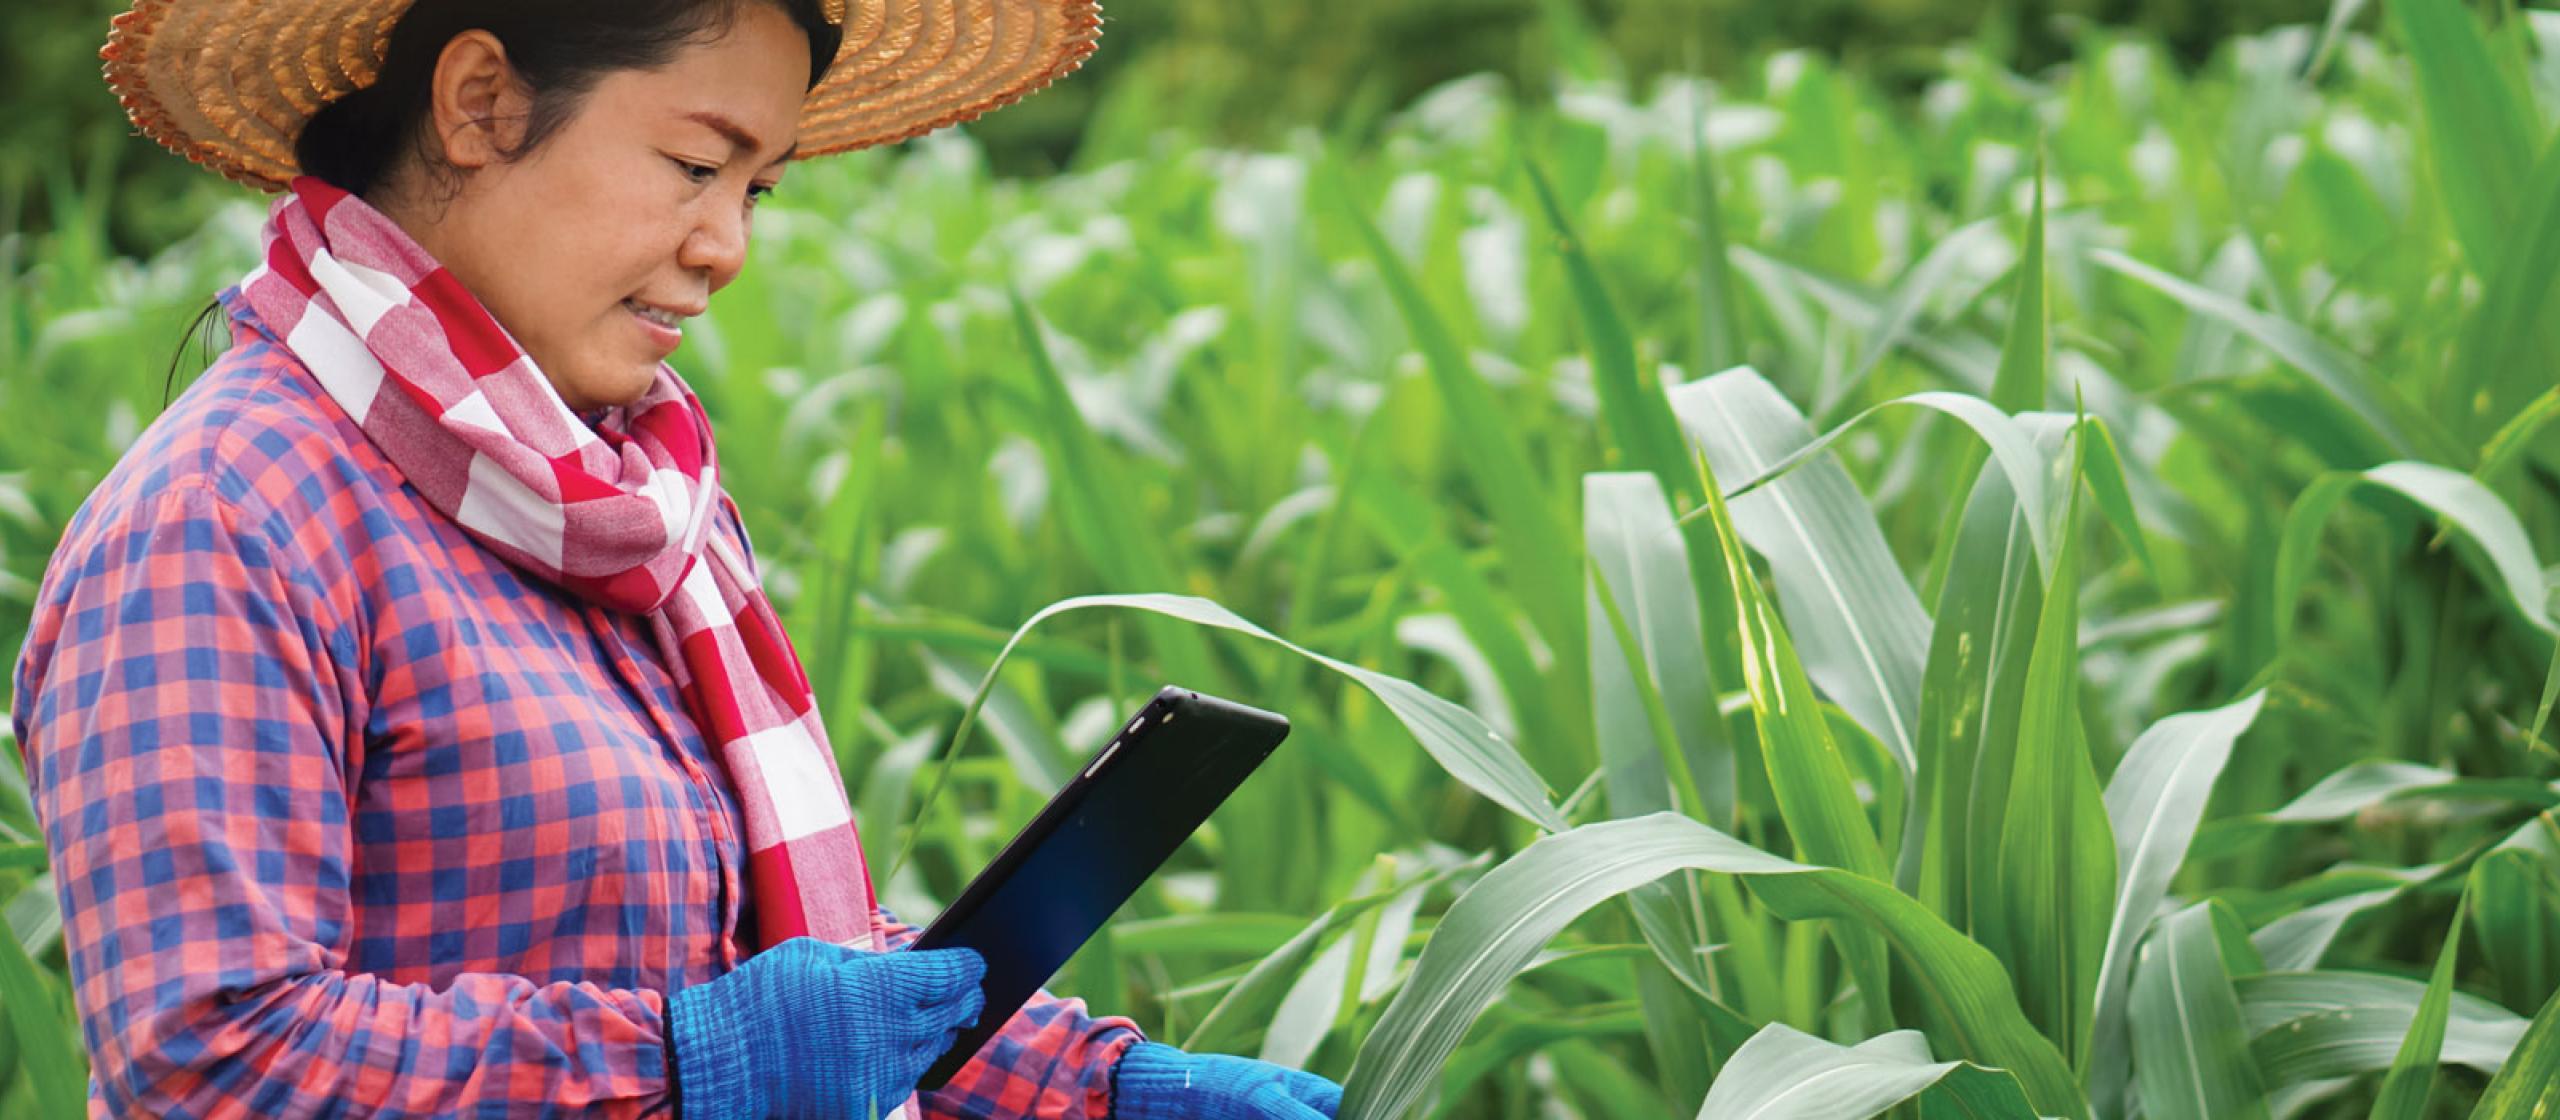 Women in crop wearing hat and gloves looking at a mobile device